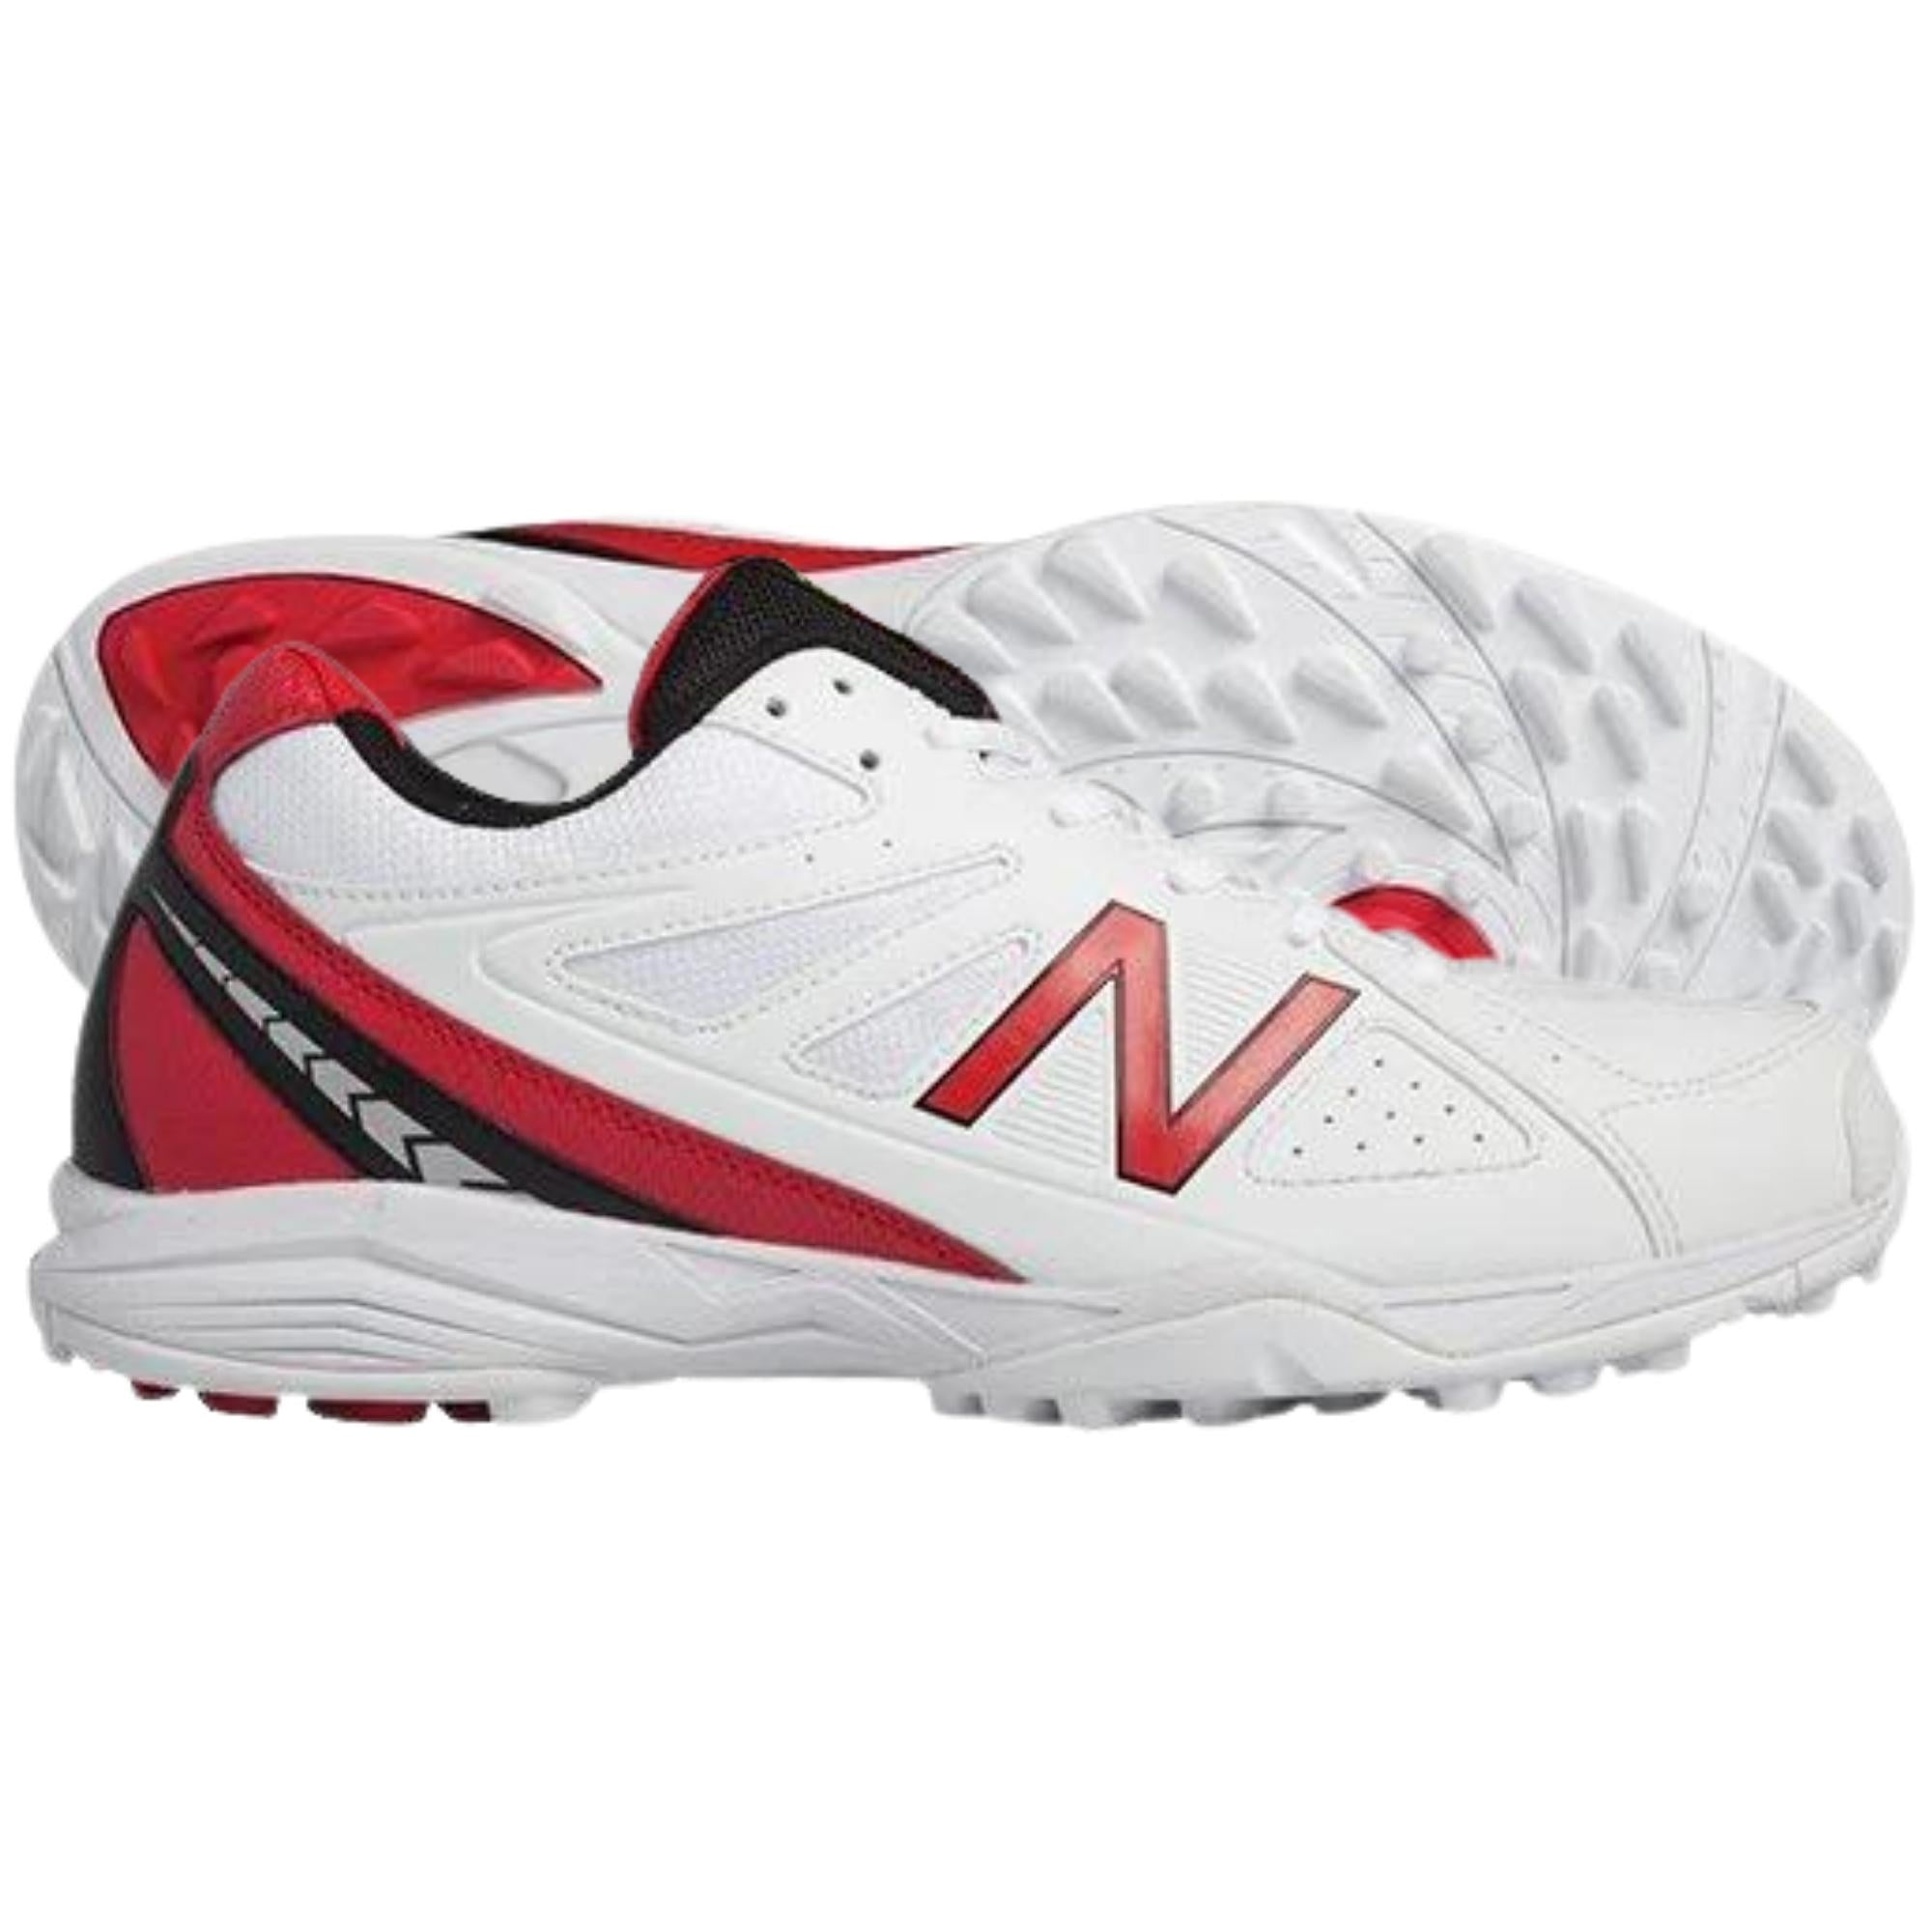 New Balance Cricket Shoes, Model CK4020R2 Rubber Sole Shoes - Red/White